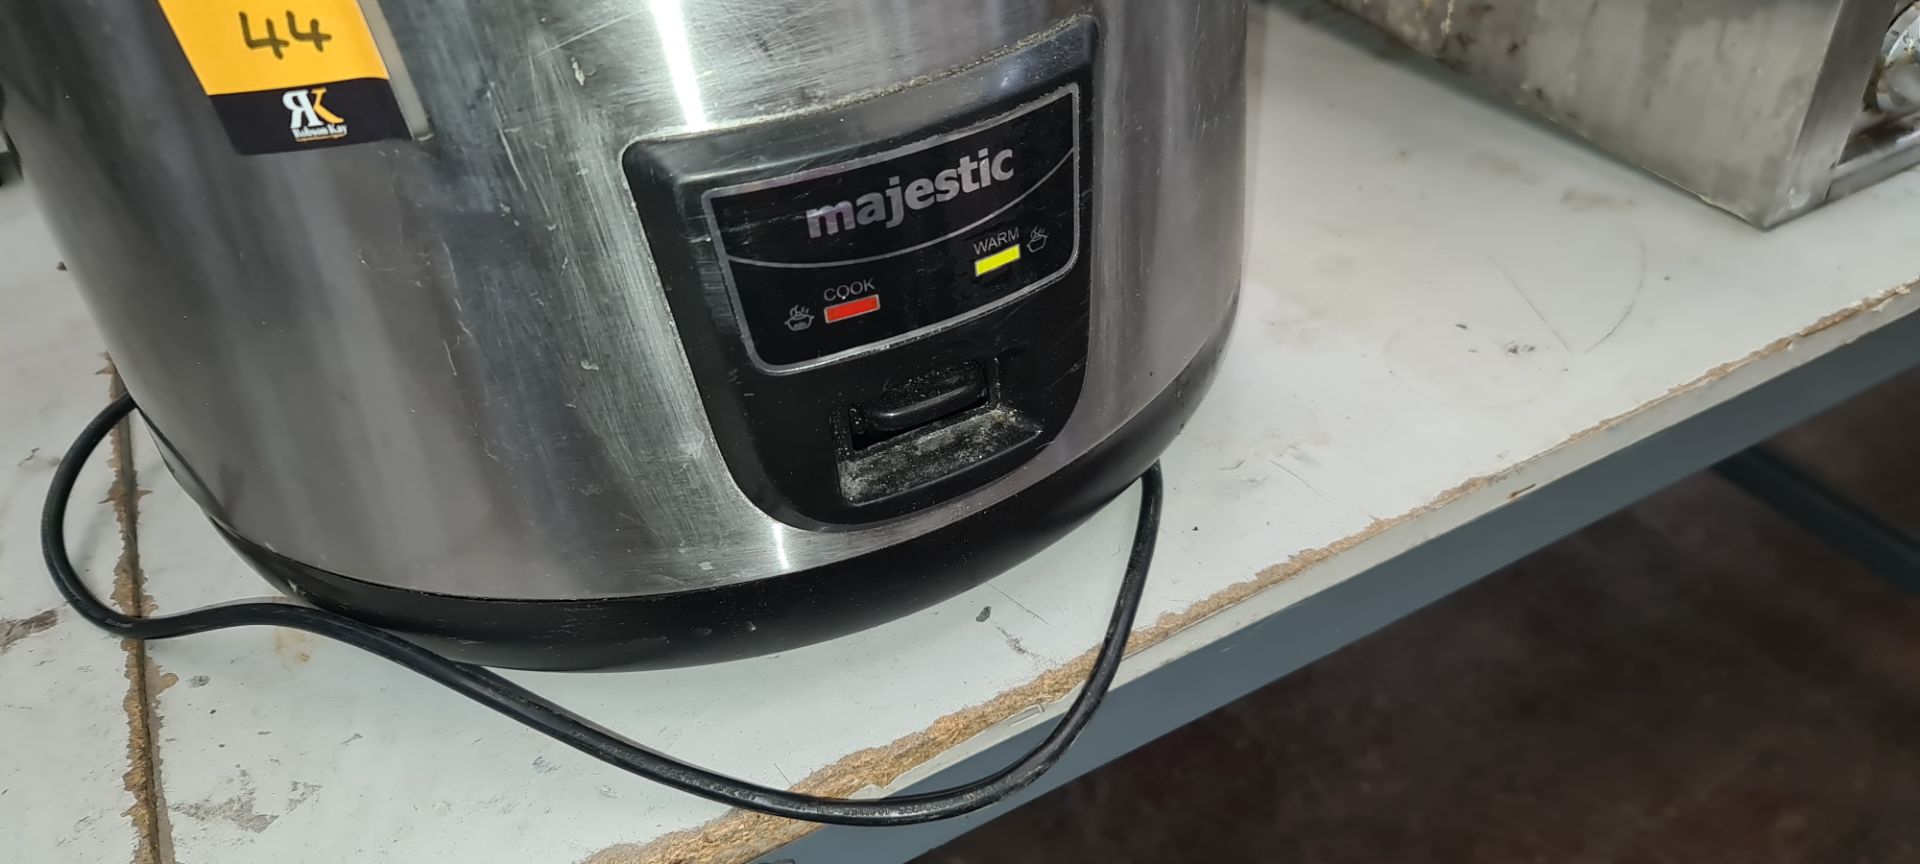 Majestic rice cooker - Image 3 of 4